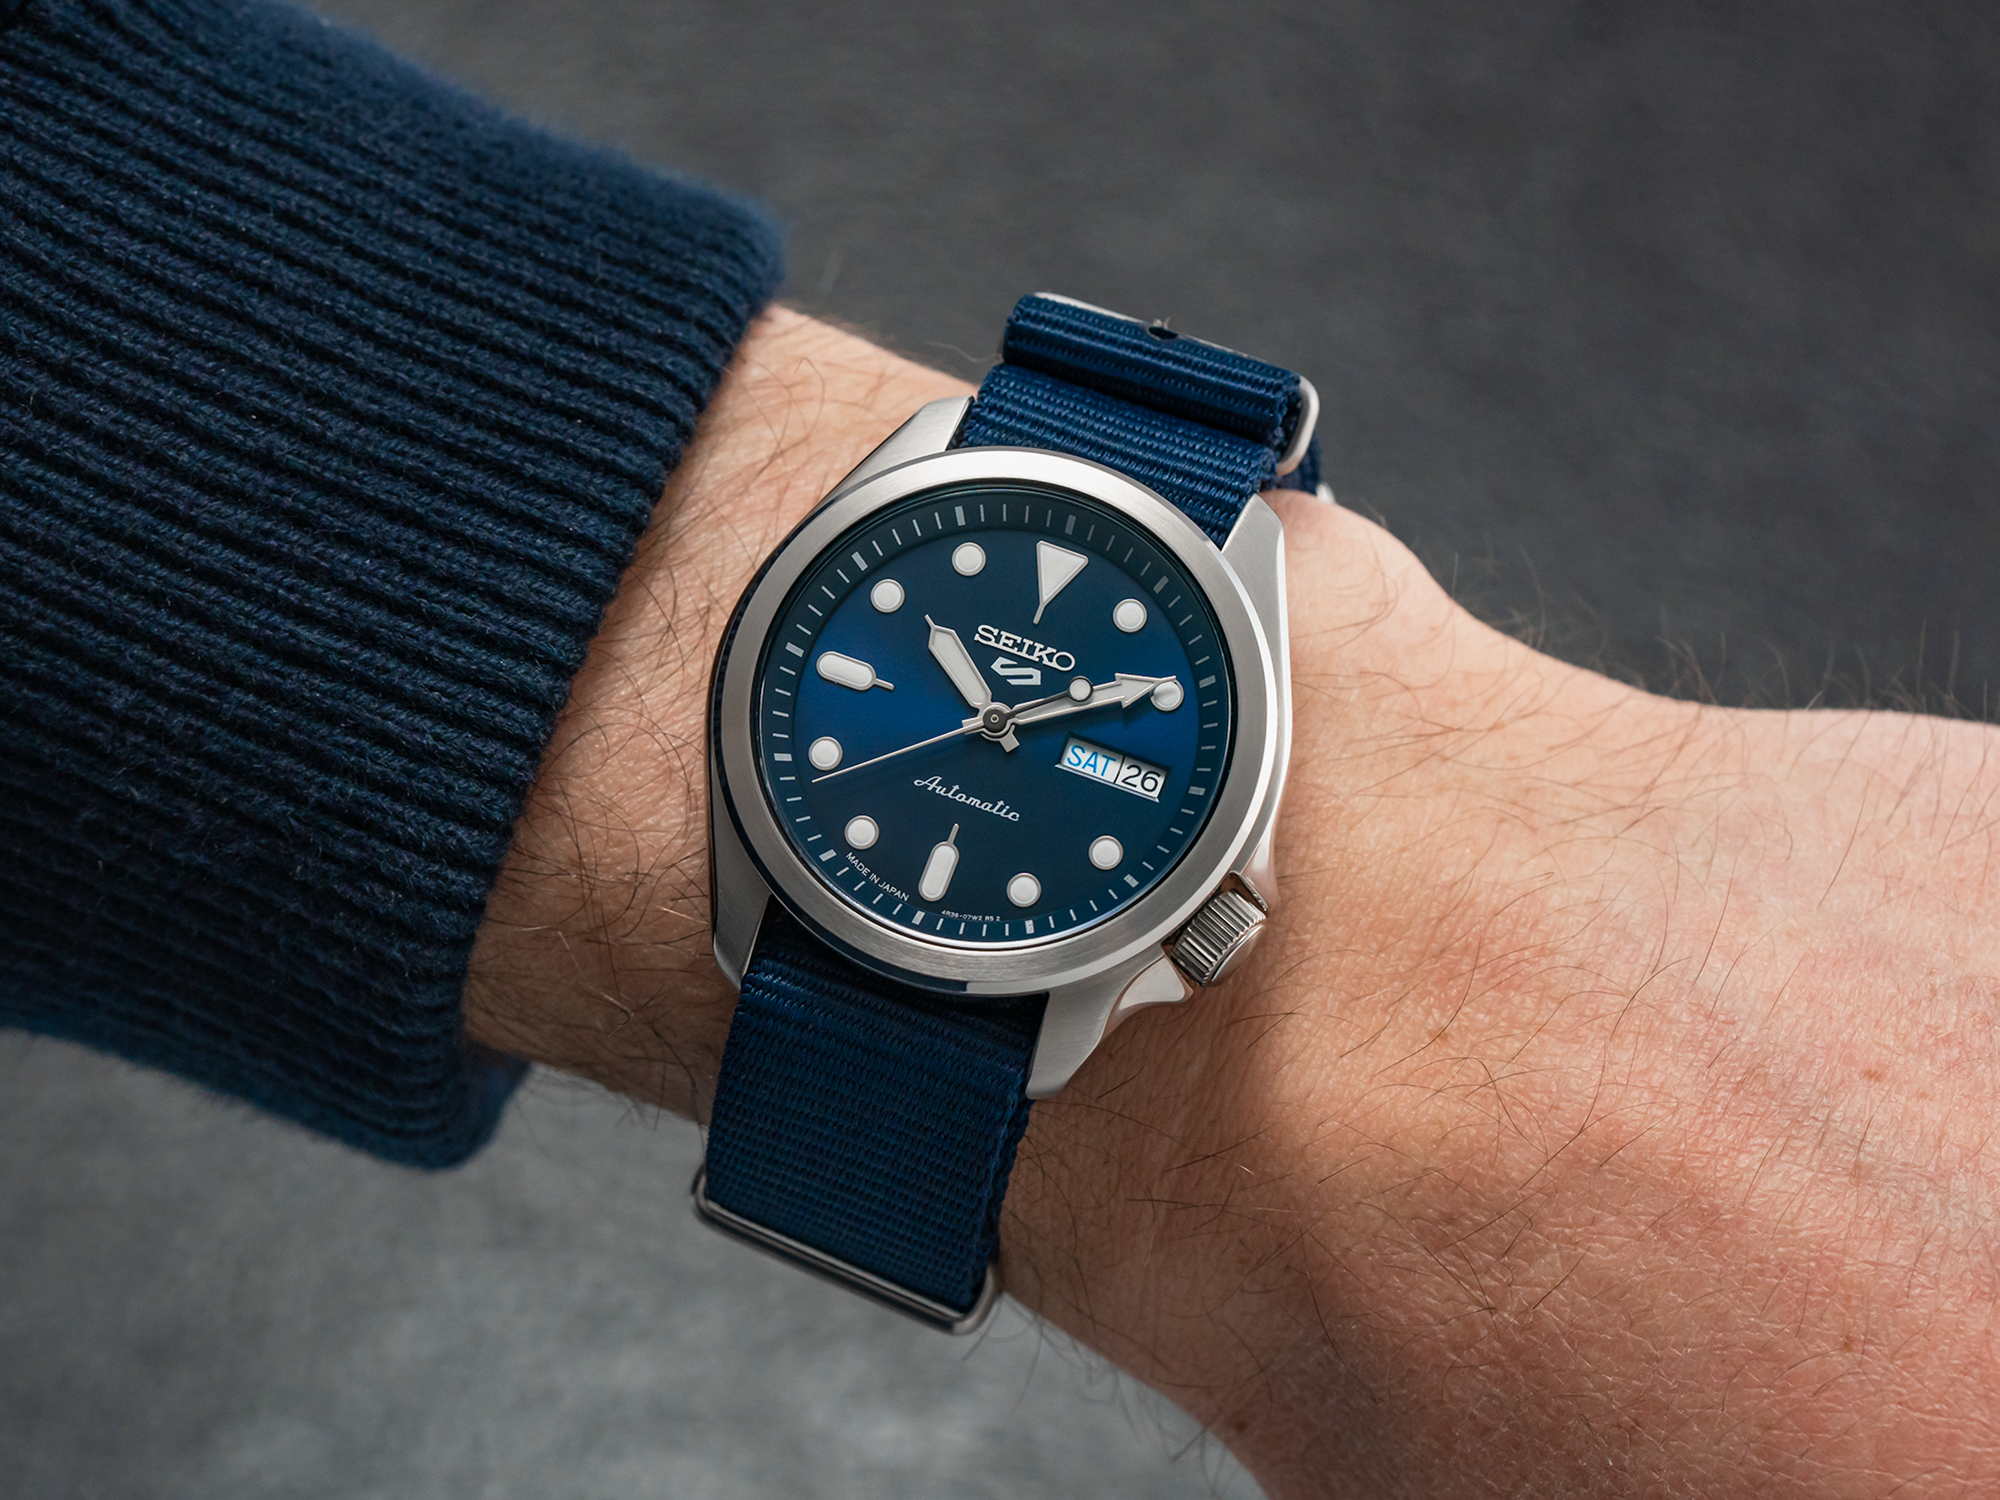 The Seiko 5 Sports is your perfect first proper watch